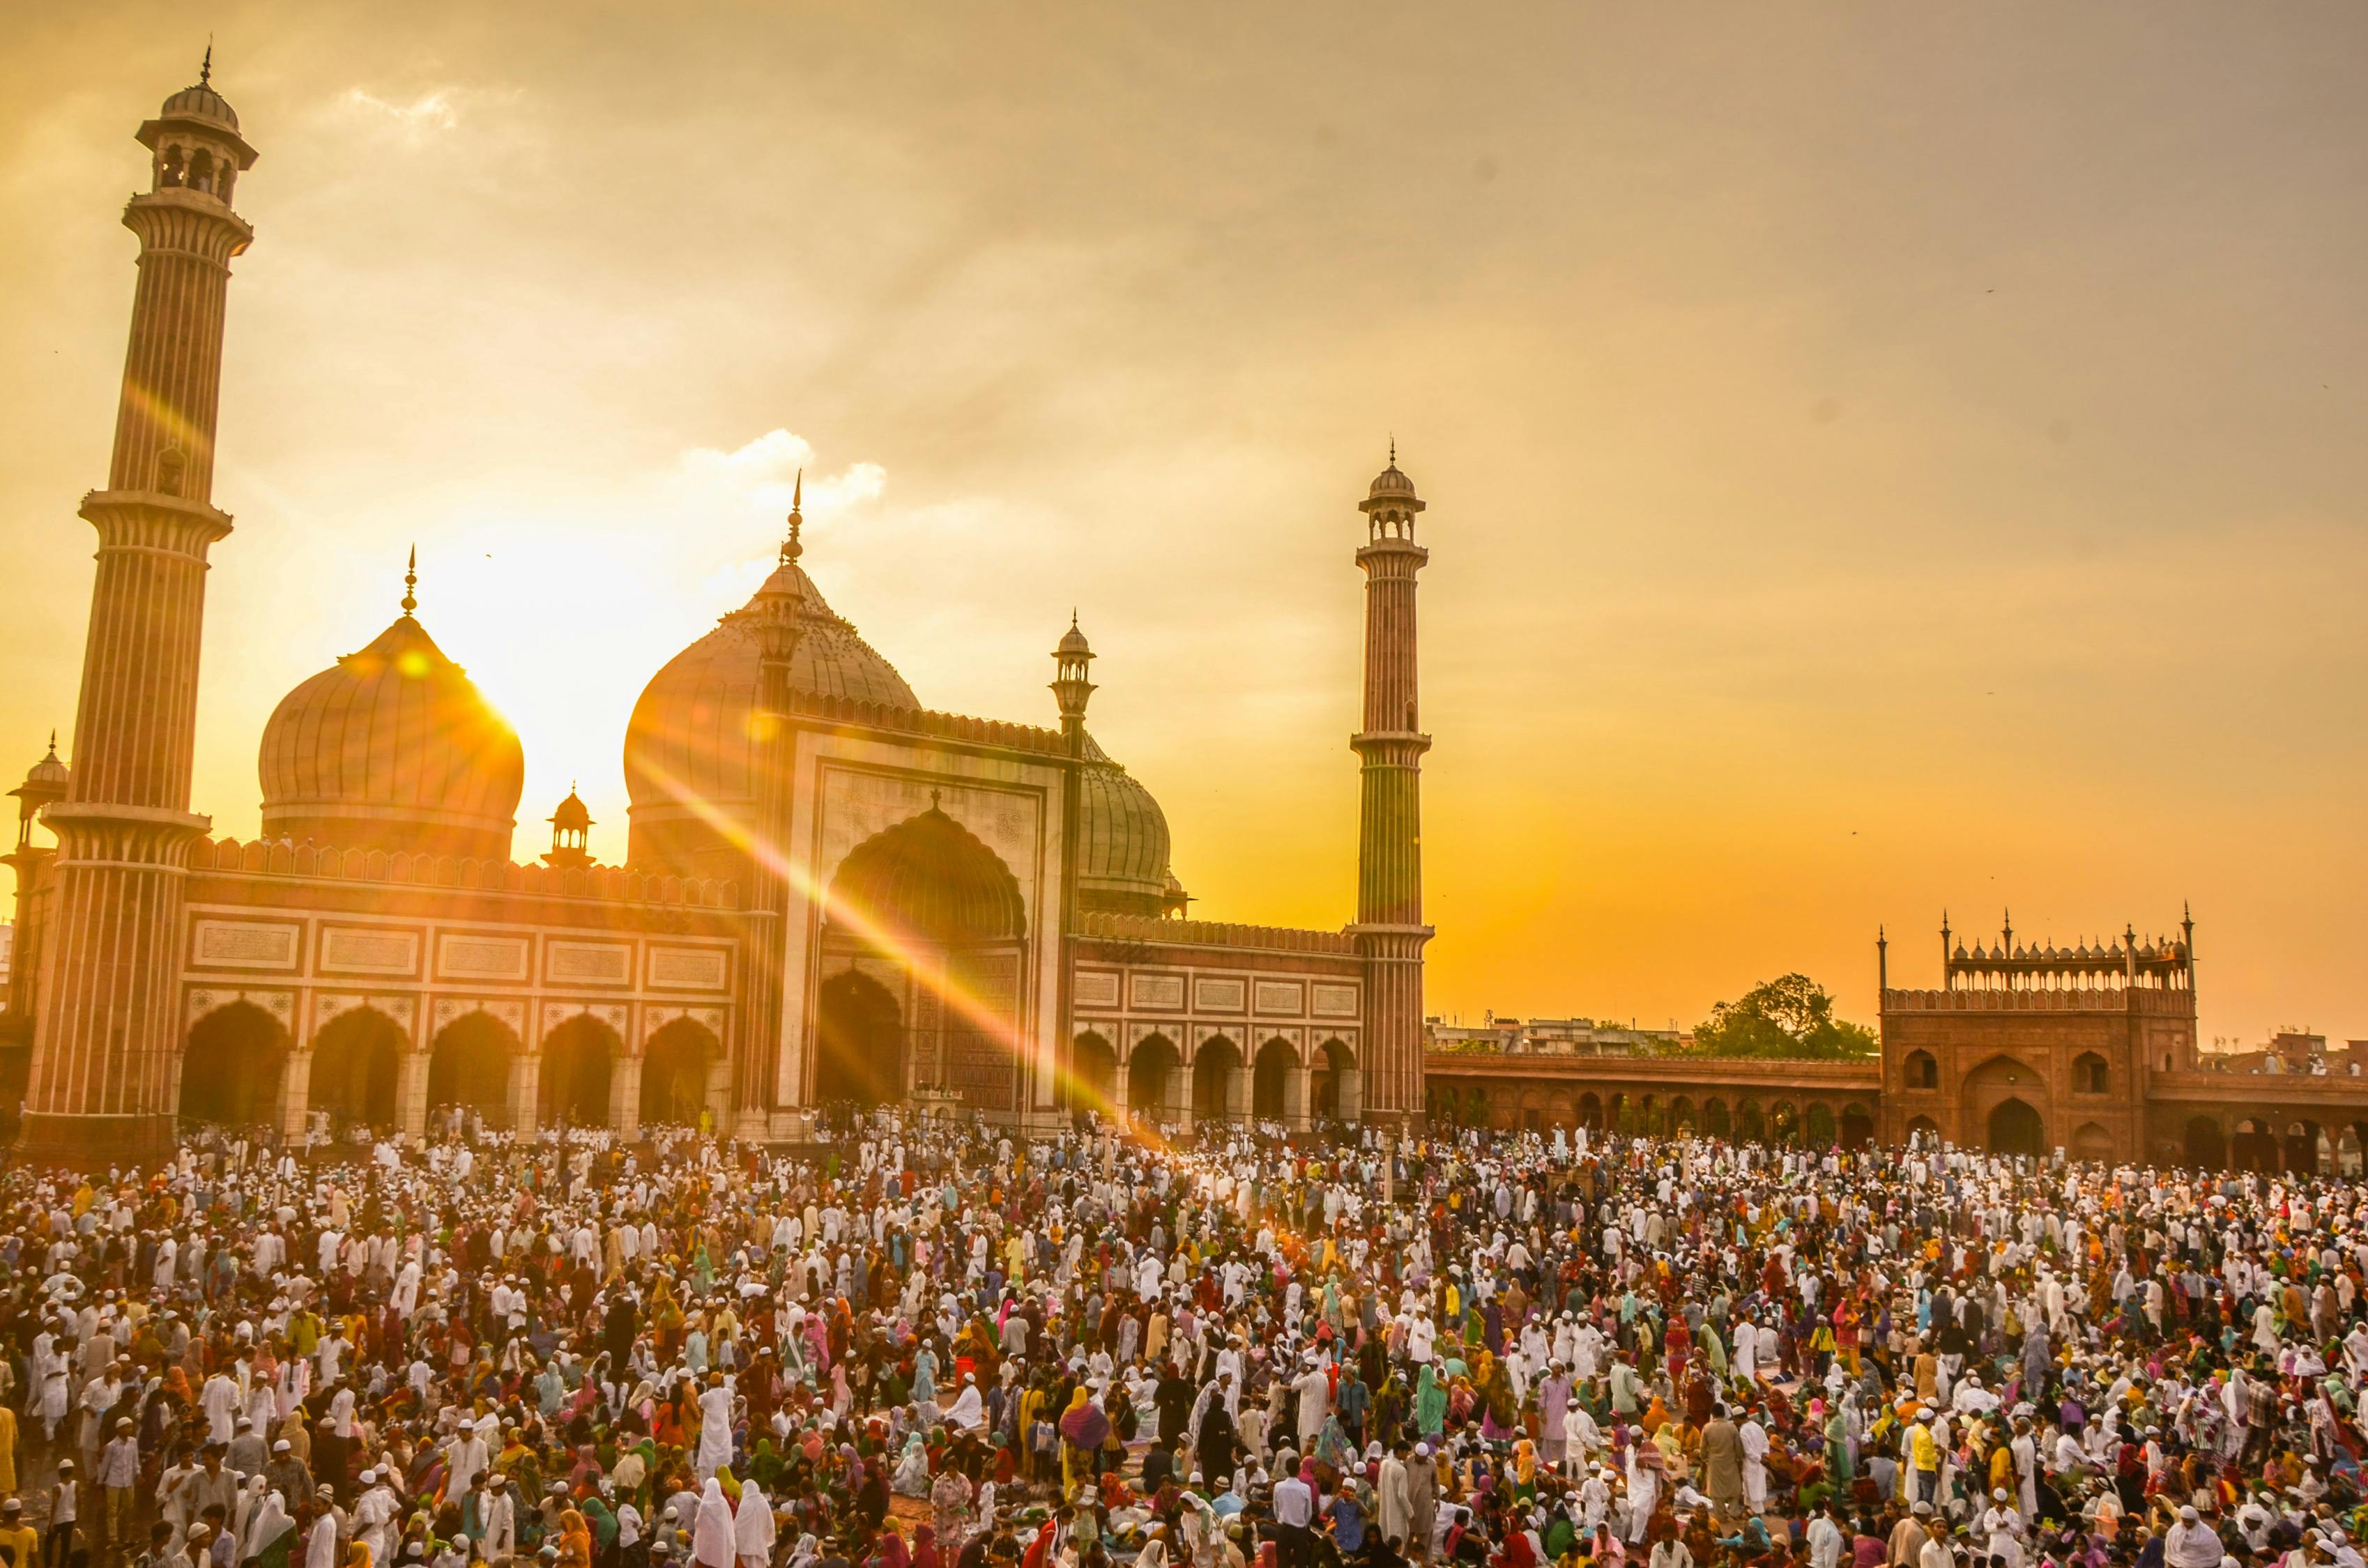 Photo Of People In Front Of Mosque During Golden Hour · Free Stock Photo